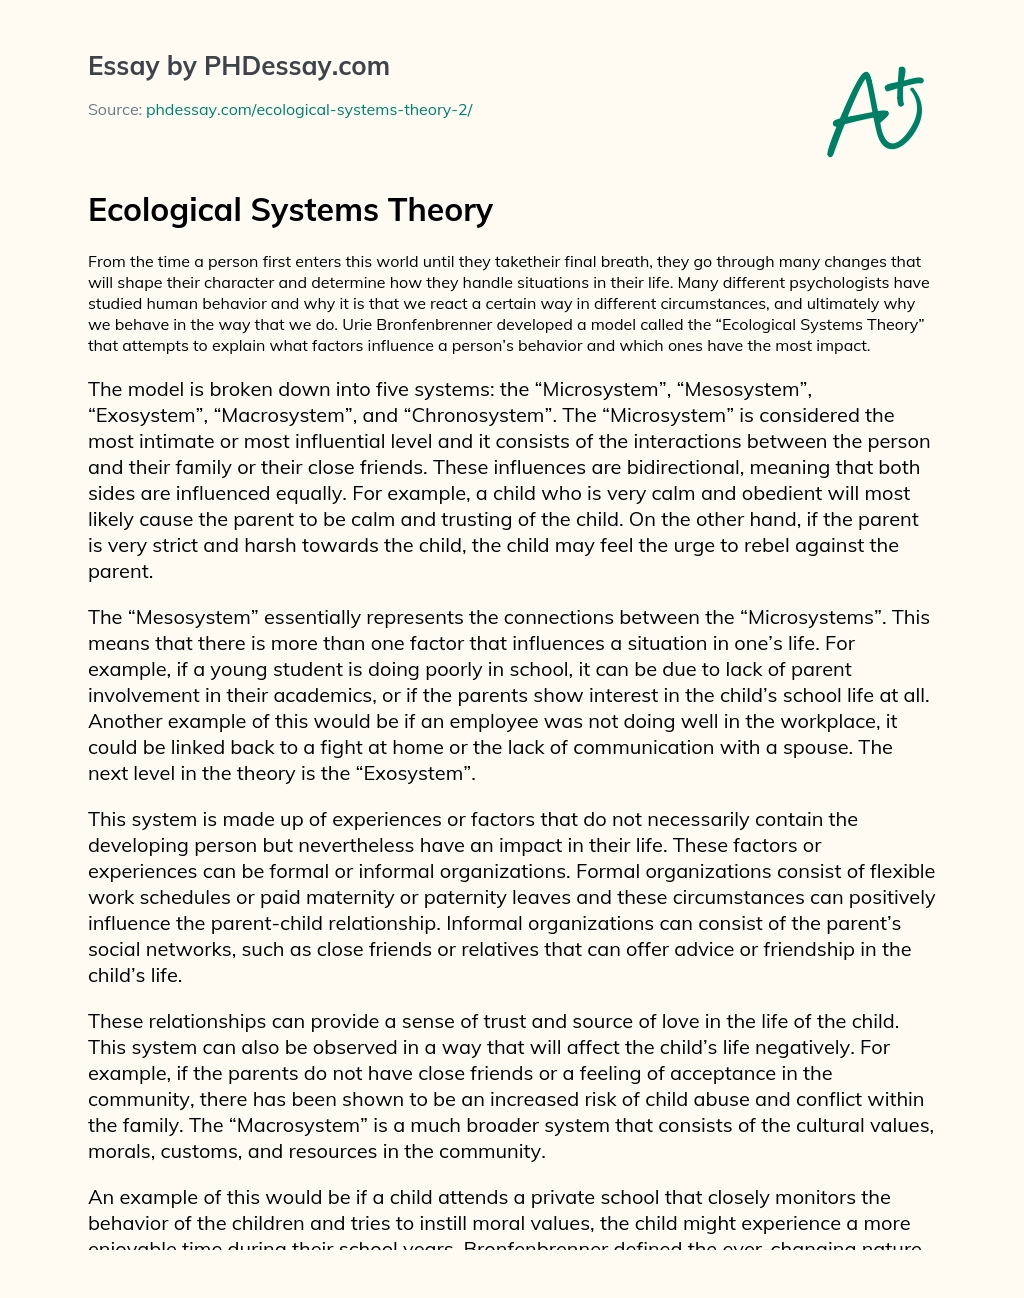 Ecological Systems Theory essay